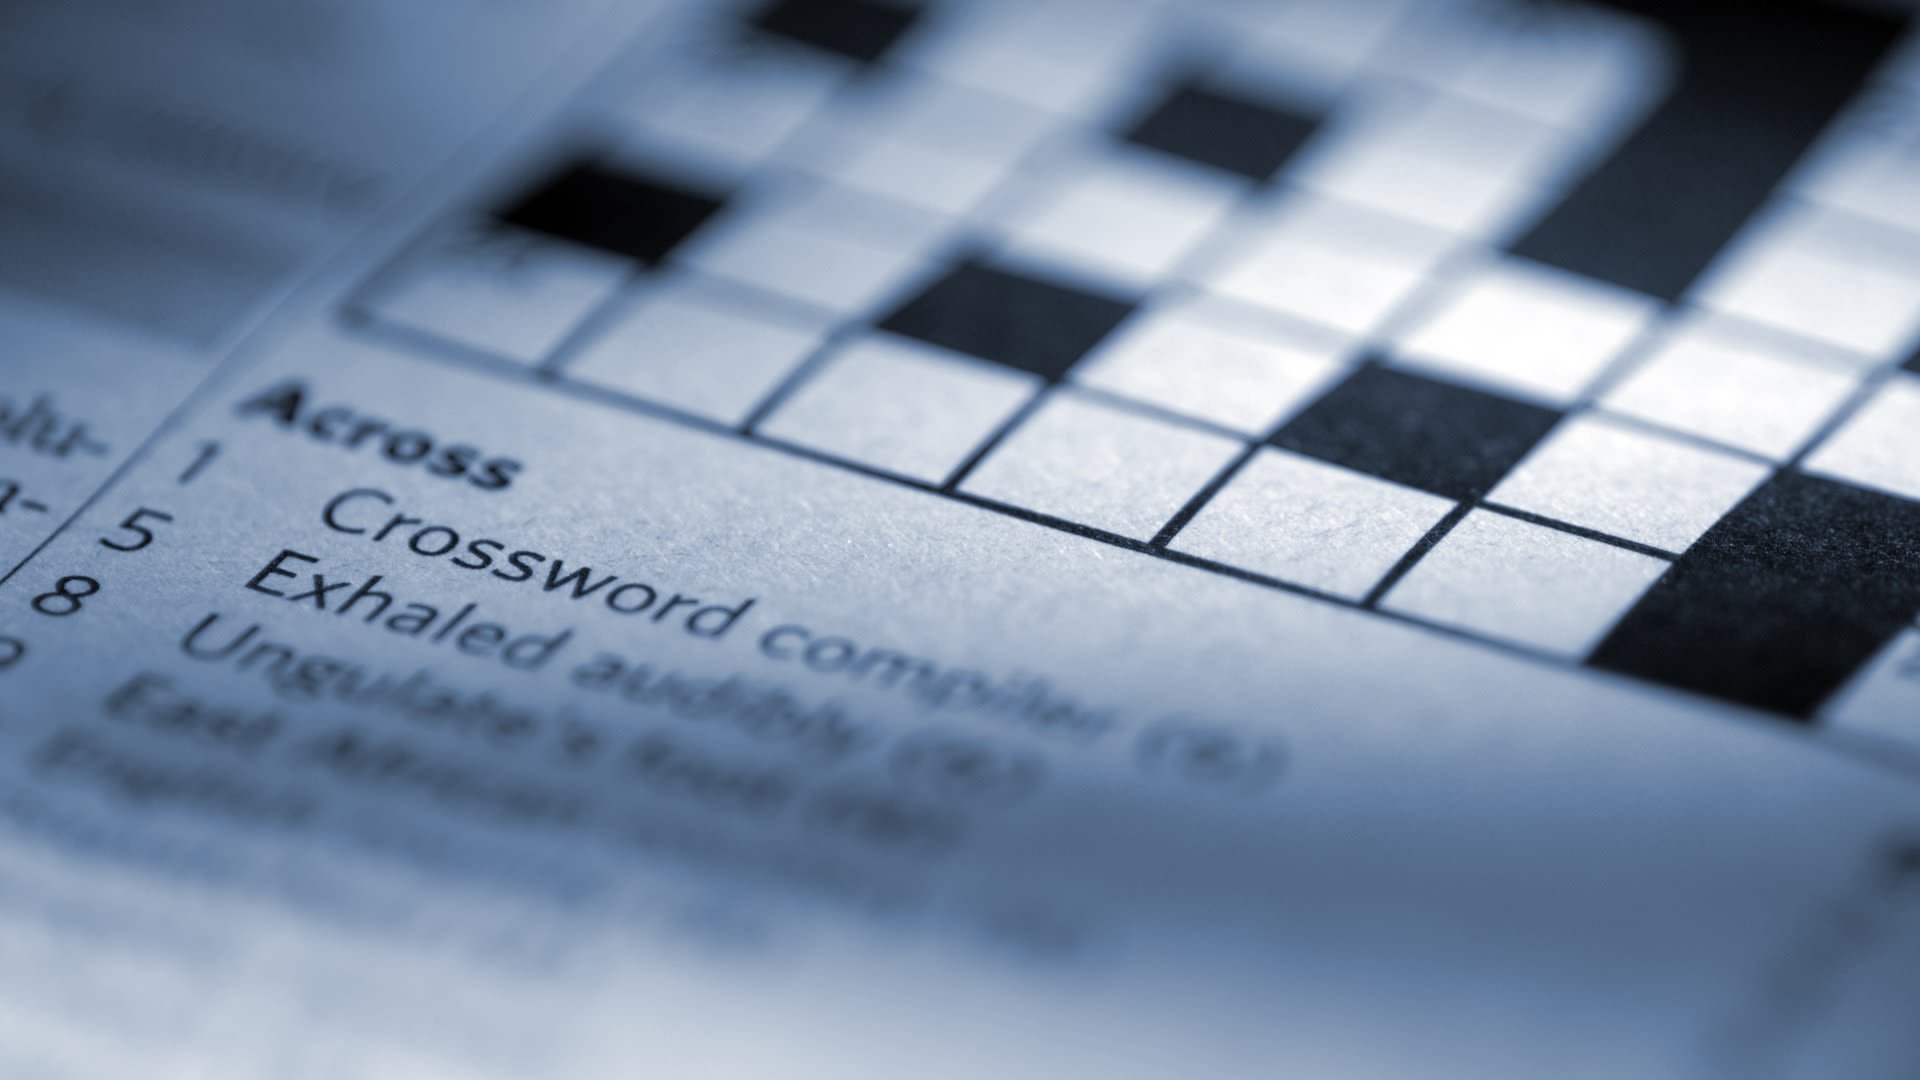 NYT's The Mini crossword answers for July 22